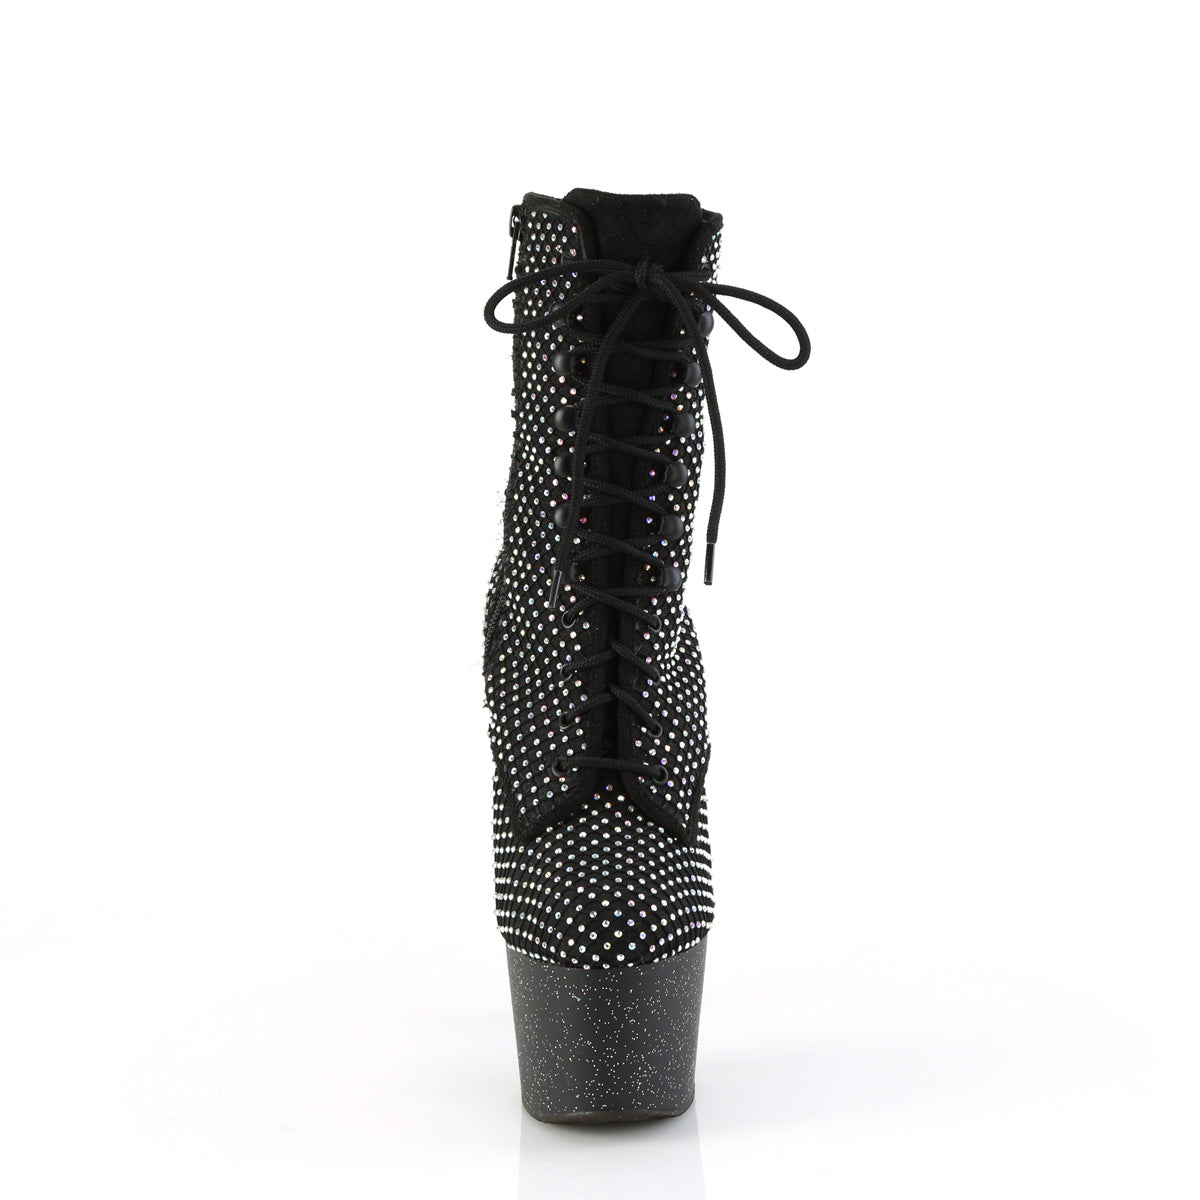 ADORE-1020RM Pleaser Black Bling Exotic Dancing Lace up Ankle Boots